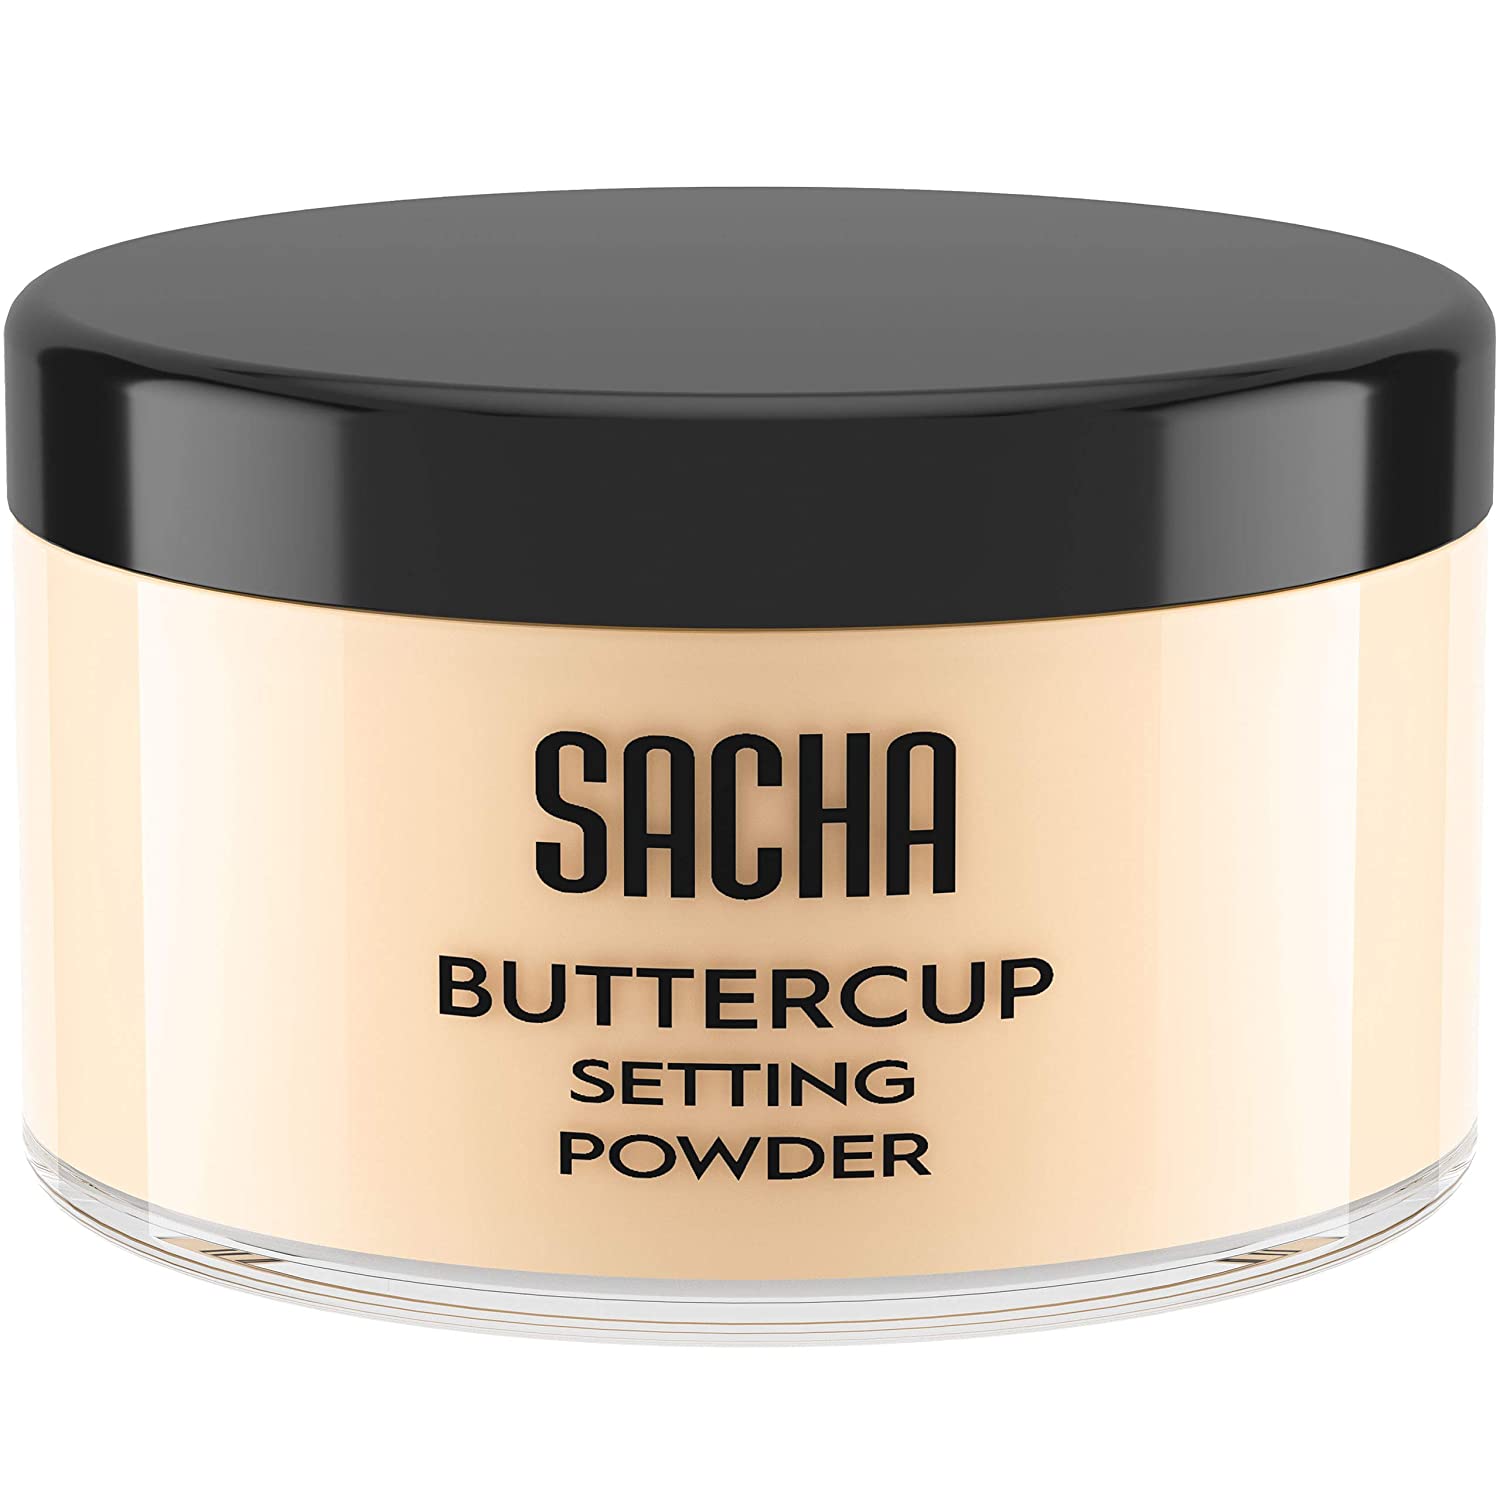 Sacha Cosmetics Buttercup Smudge-Resistant Setting Powder